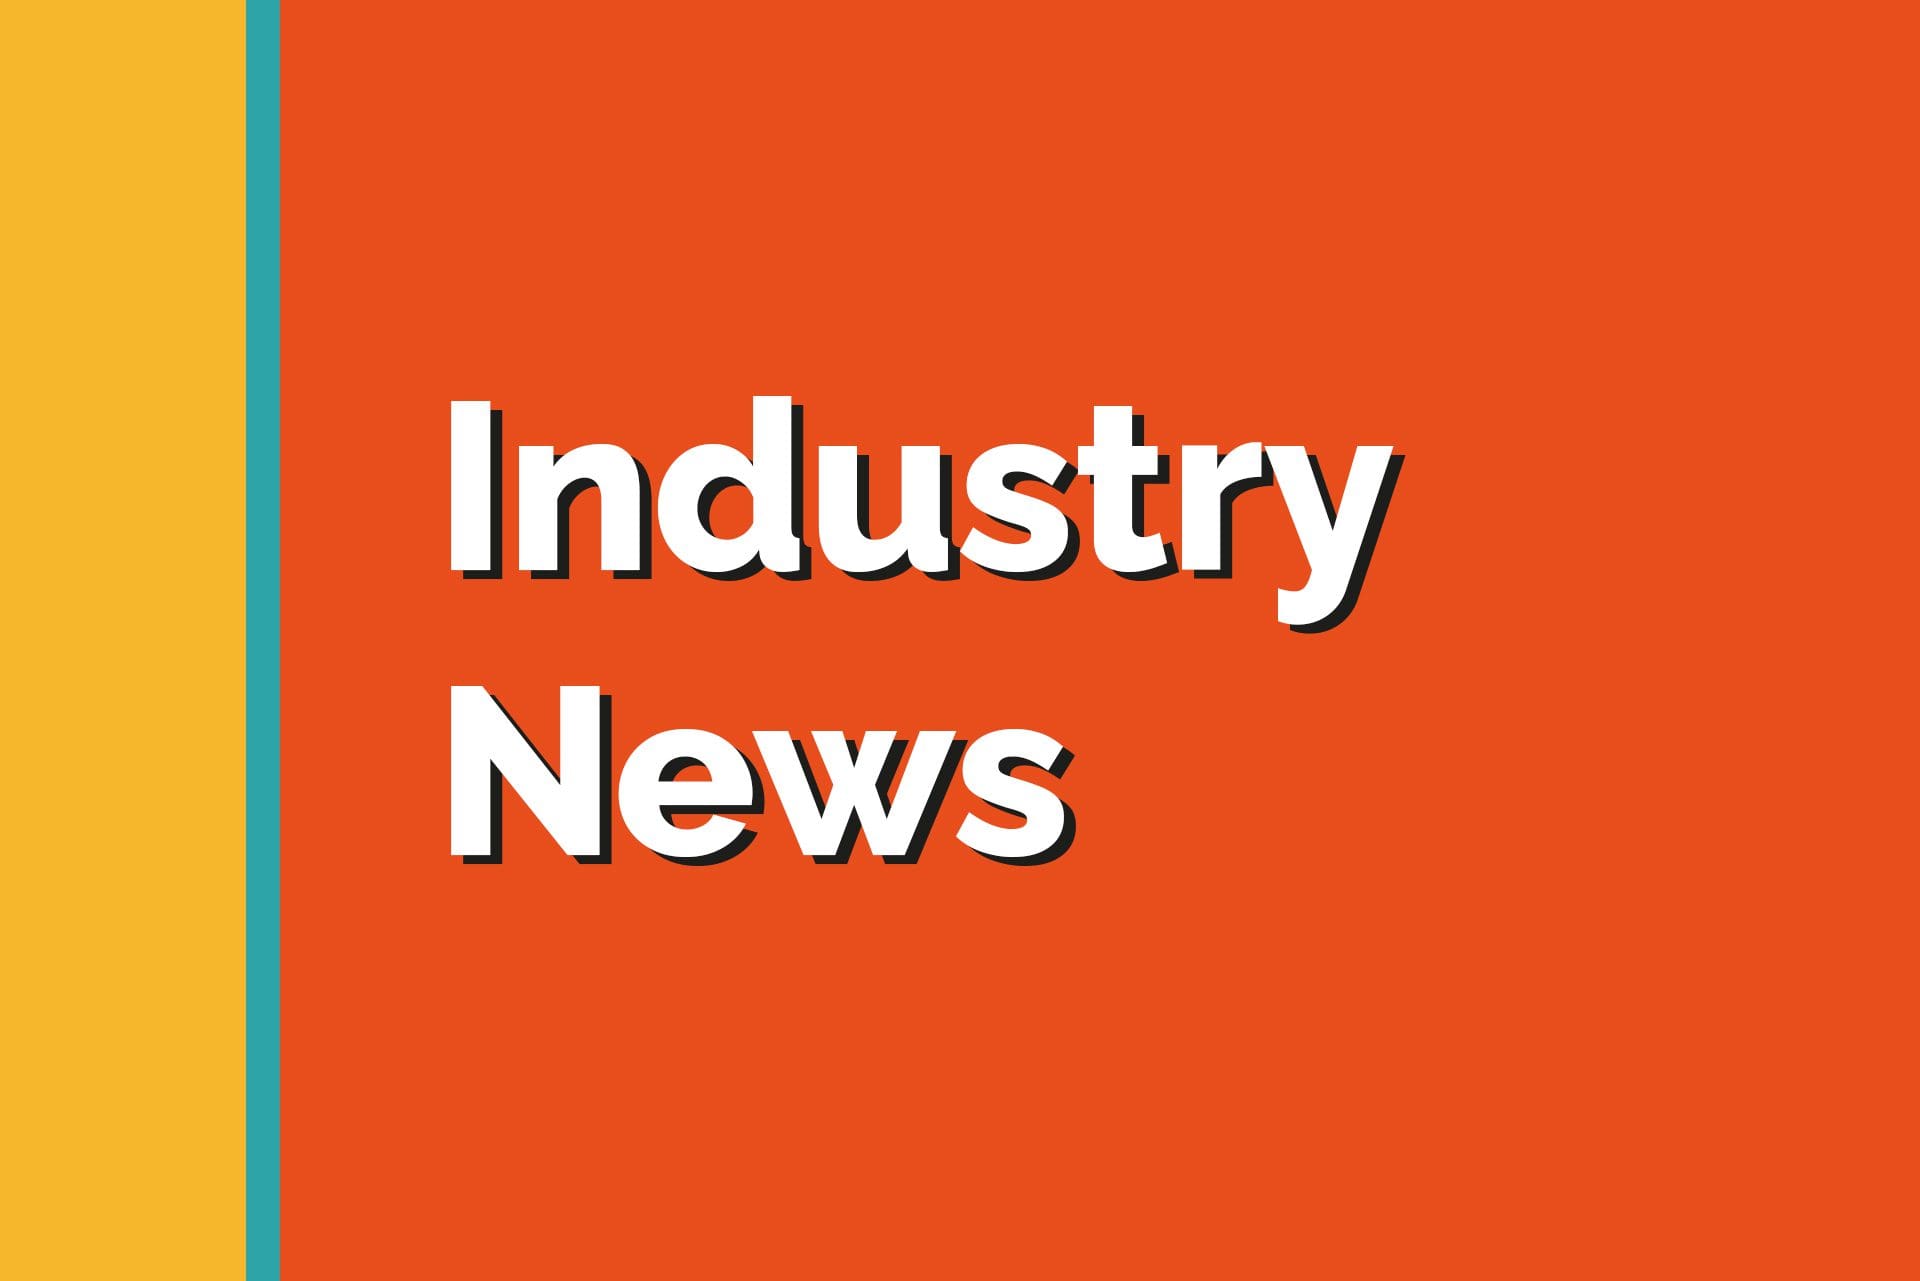 Industry New and Alerts from VOiD Applications